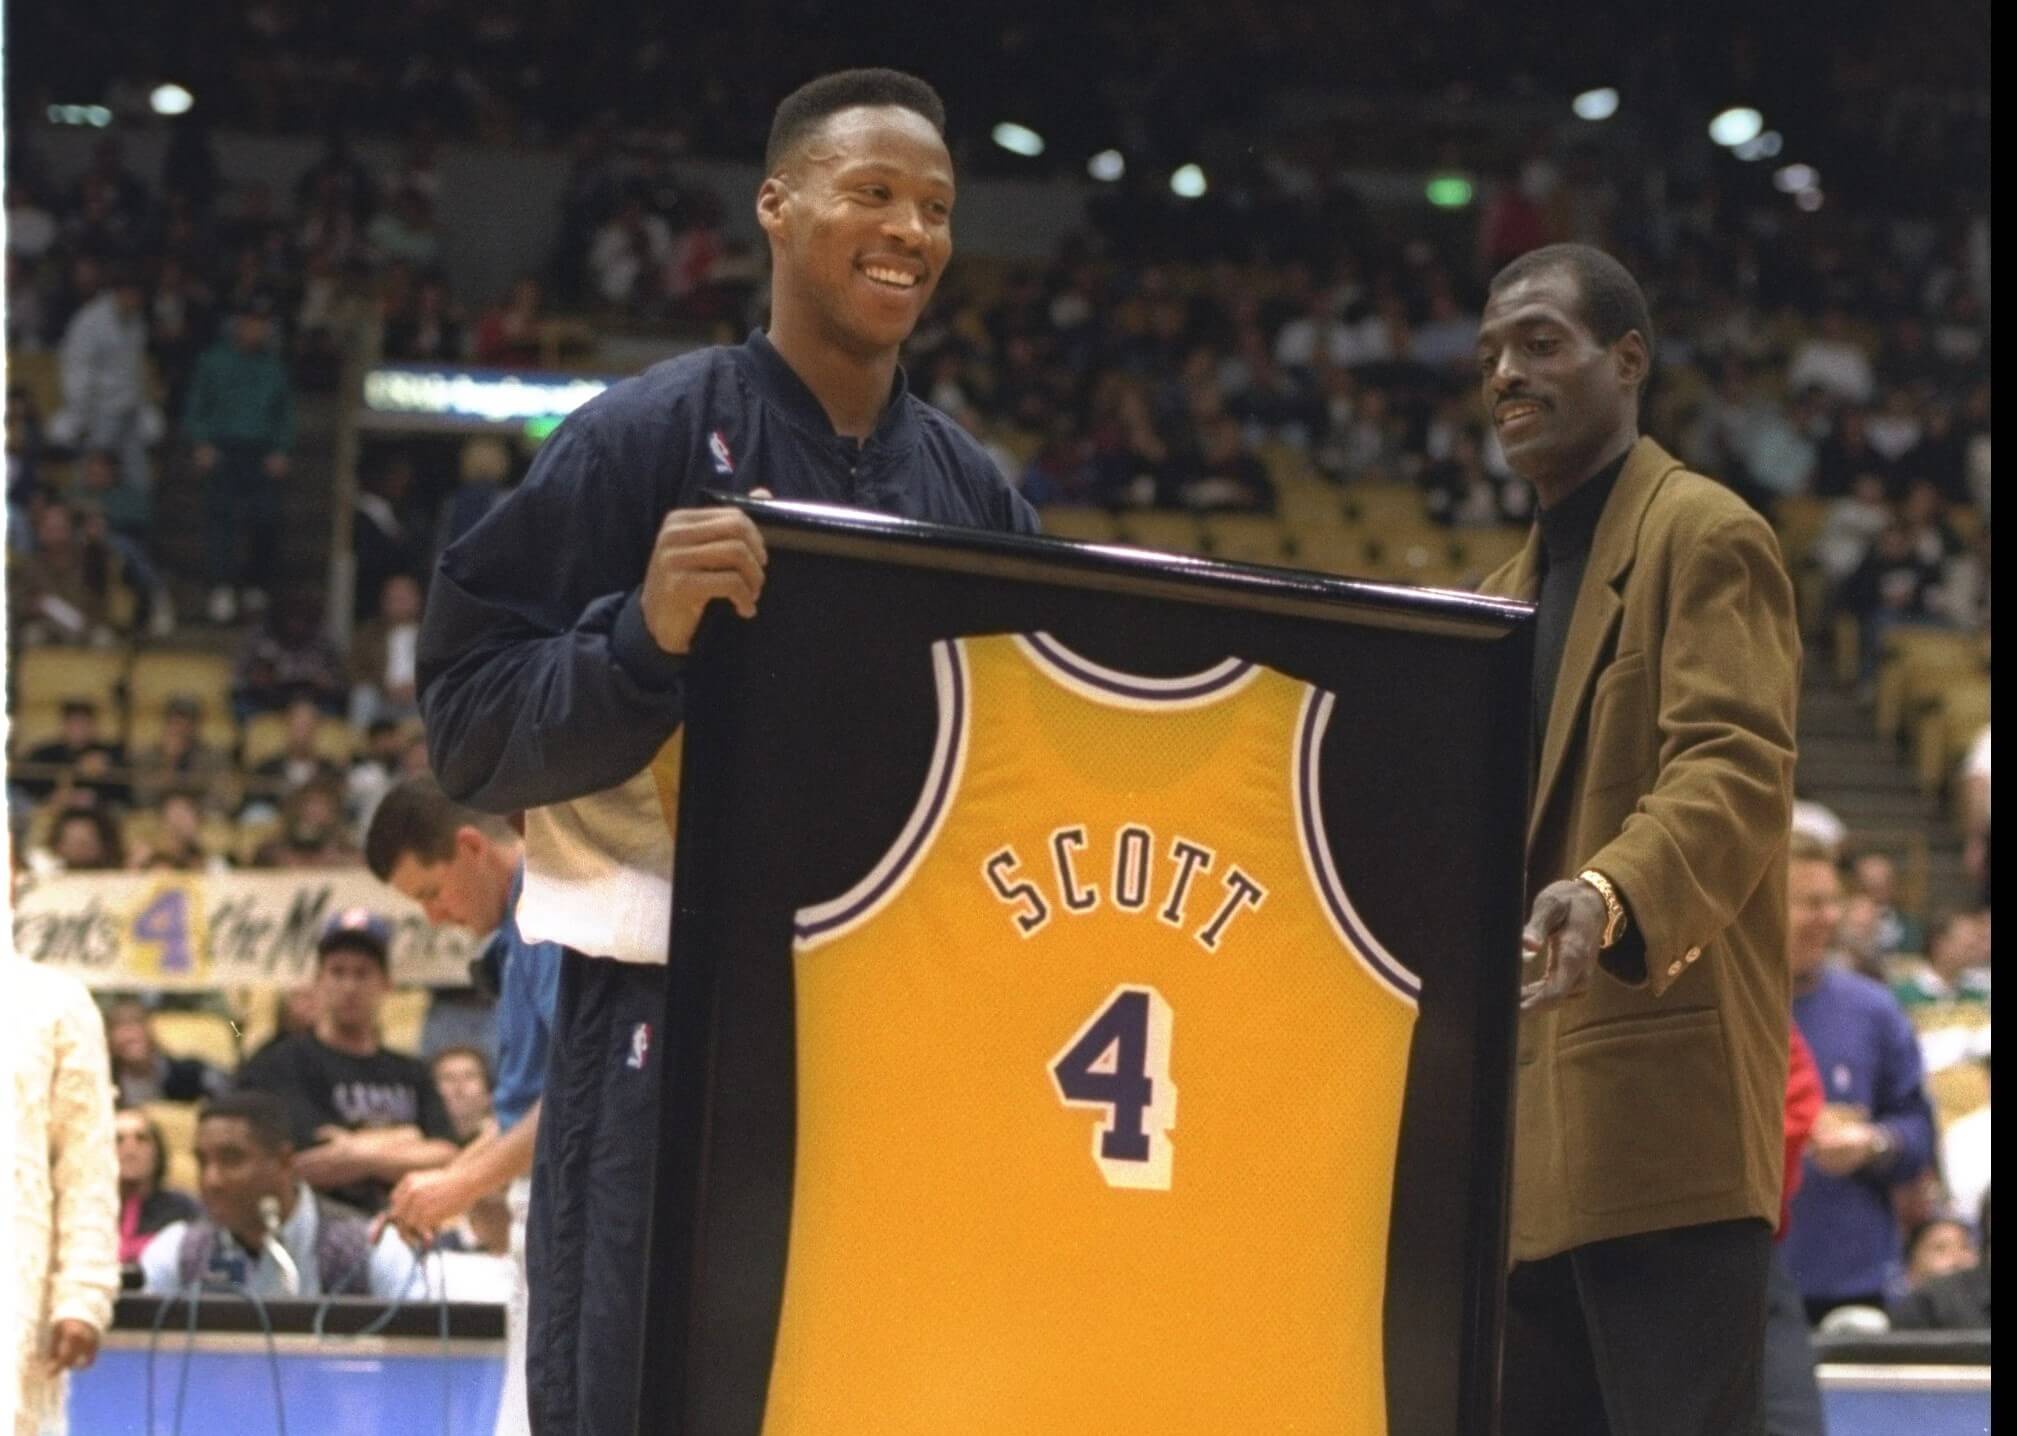 Guard Byron Scott of the Indiana Pacers, and former Los Angeles Laker, is presented with a framed Lakers jersey by former teammate Michael Cooper.